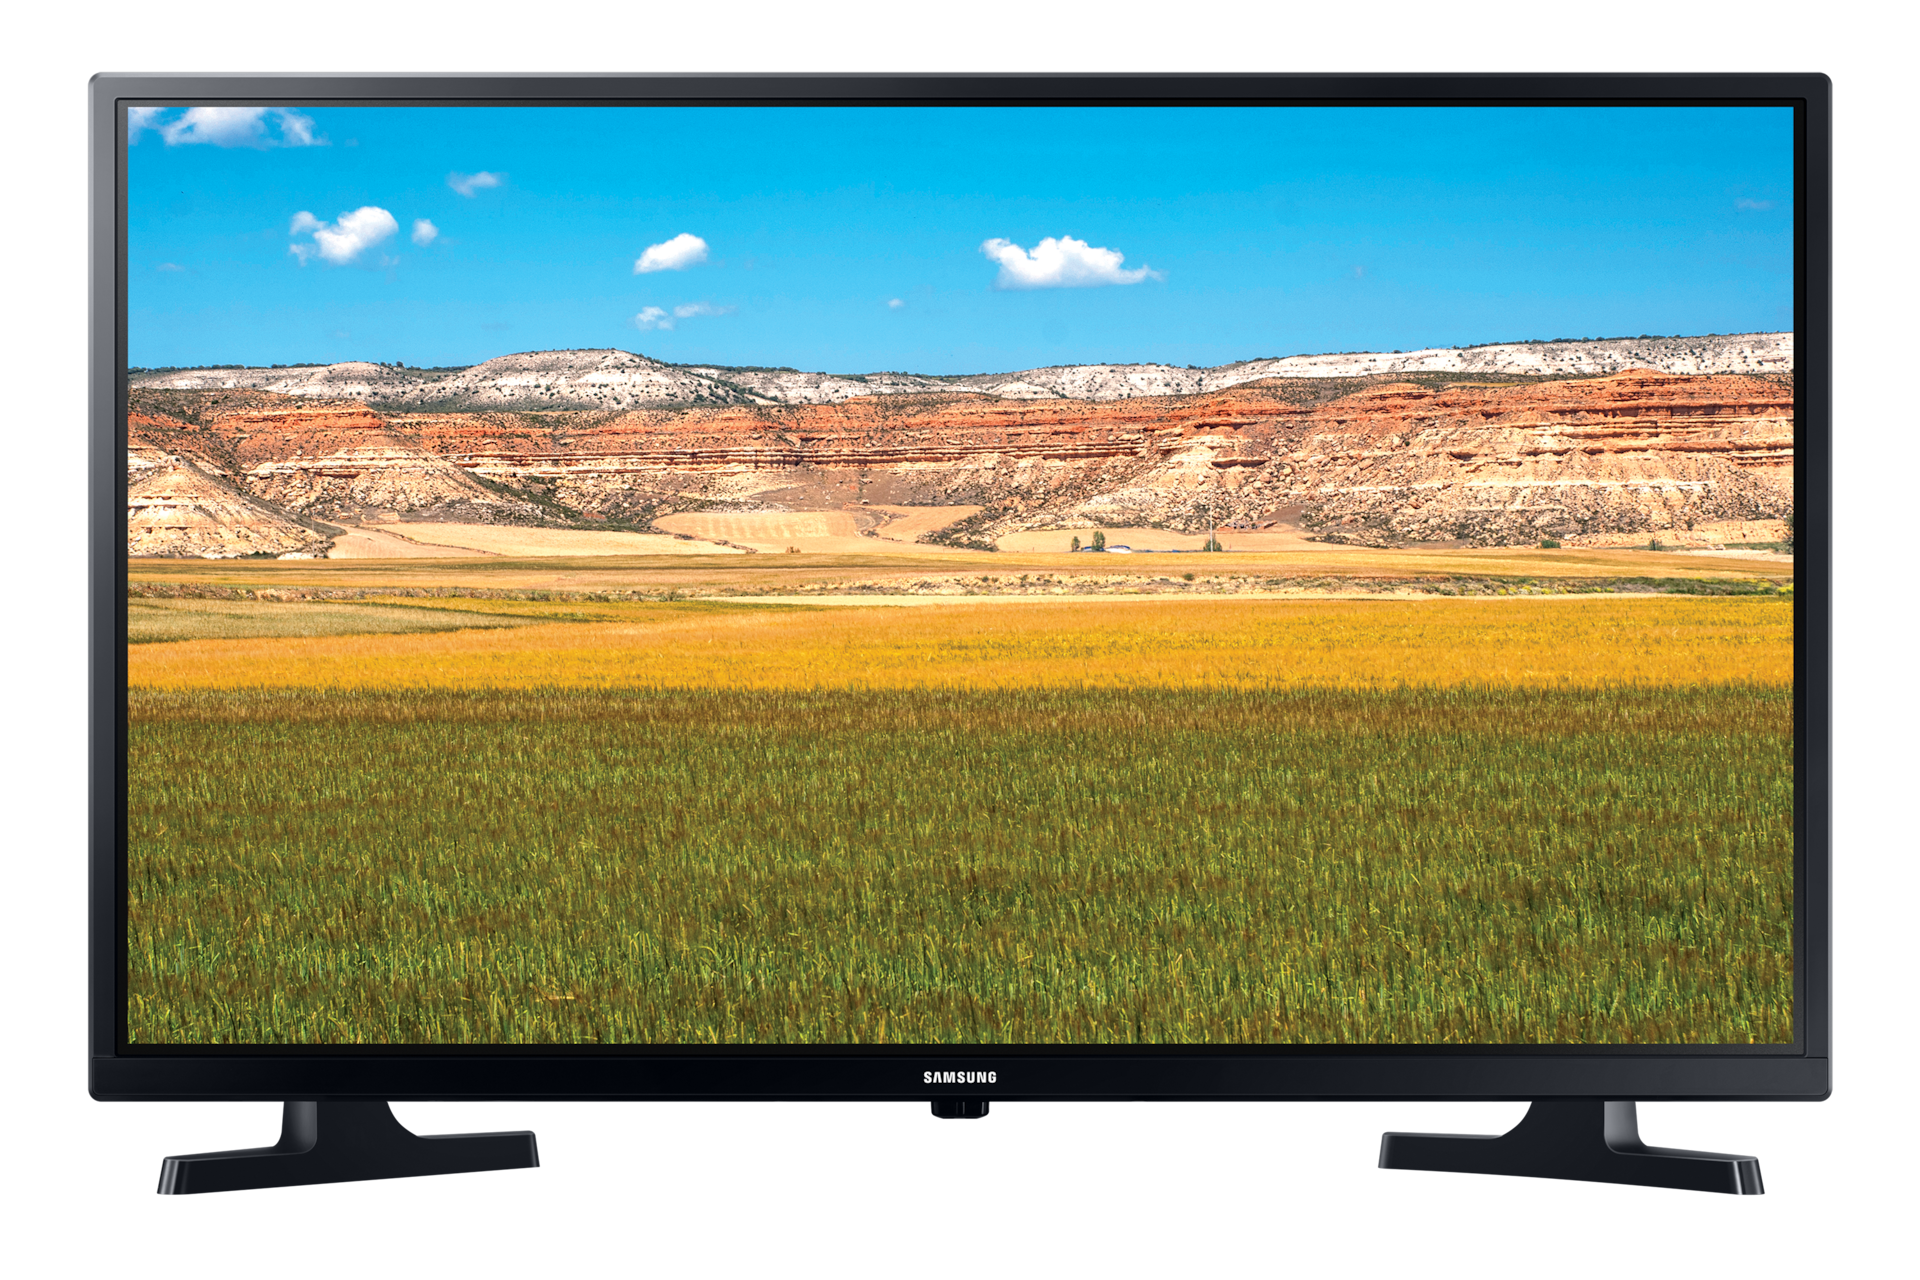 Grand Plus Black 36 Inch Smart LED TV at Rs 13000/piece in New Delhi